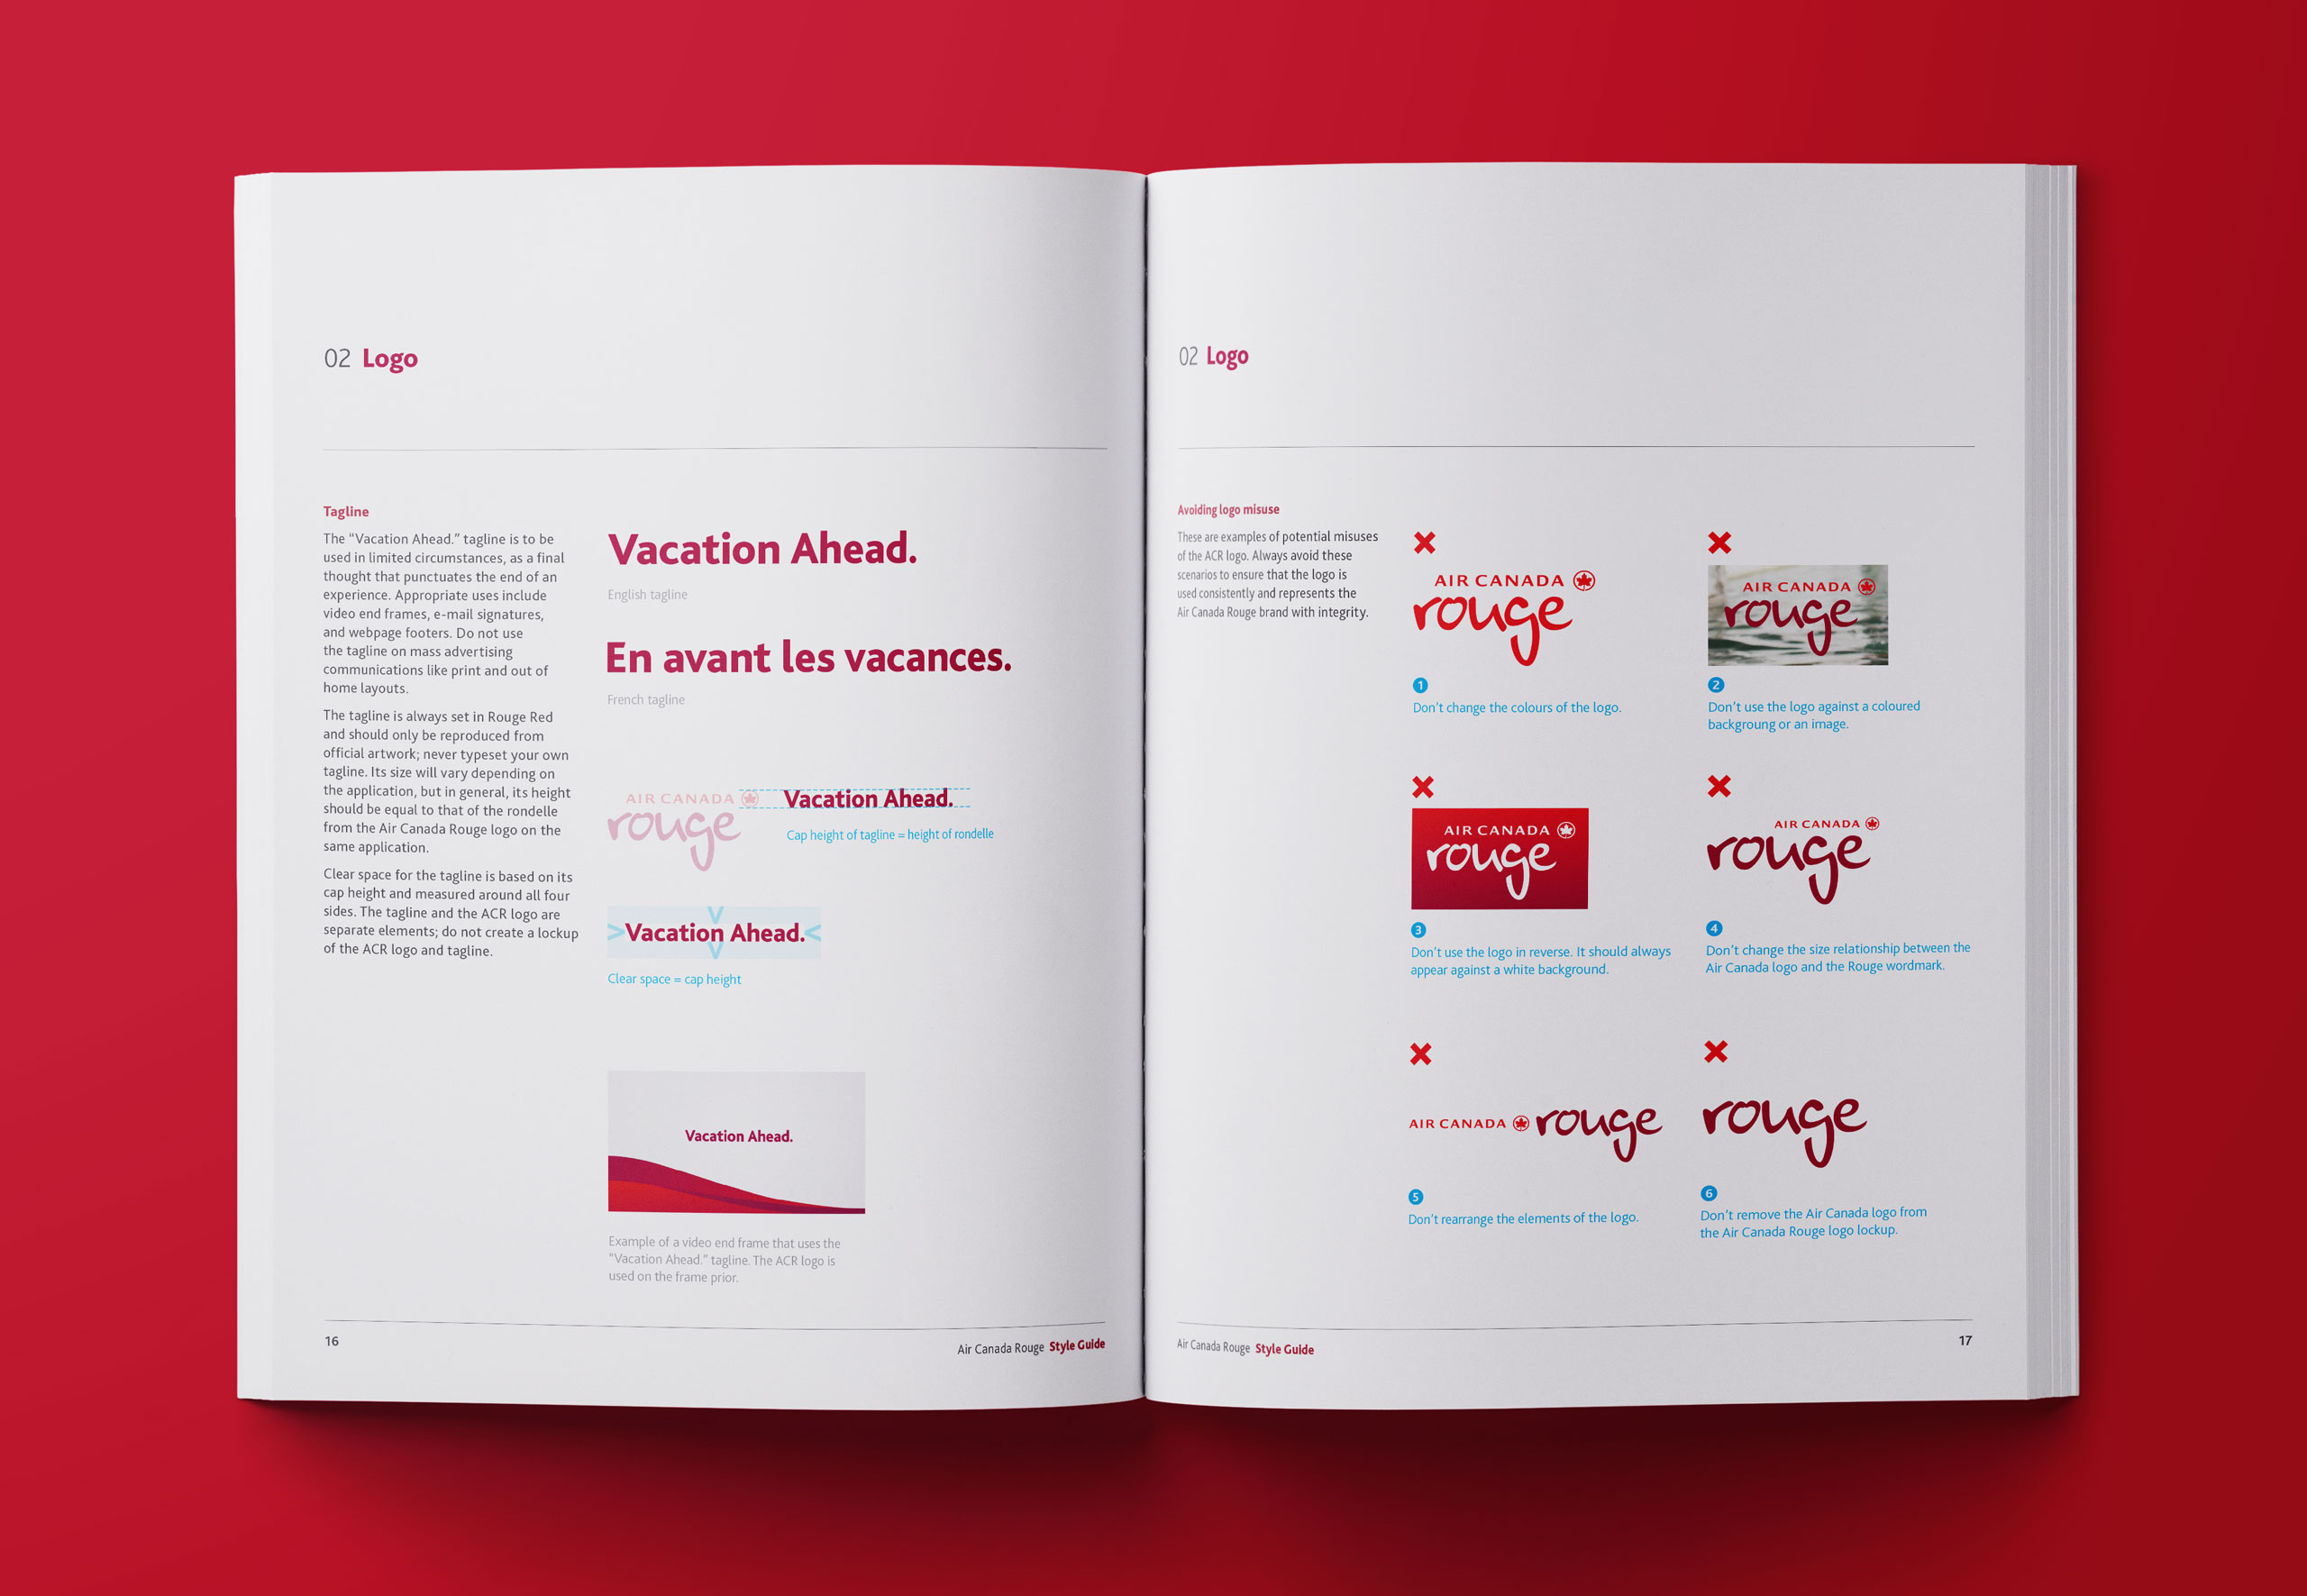 Book spread showing examples of how the Air Canada Rouge logo might be misused